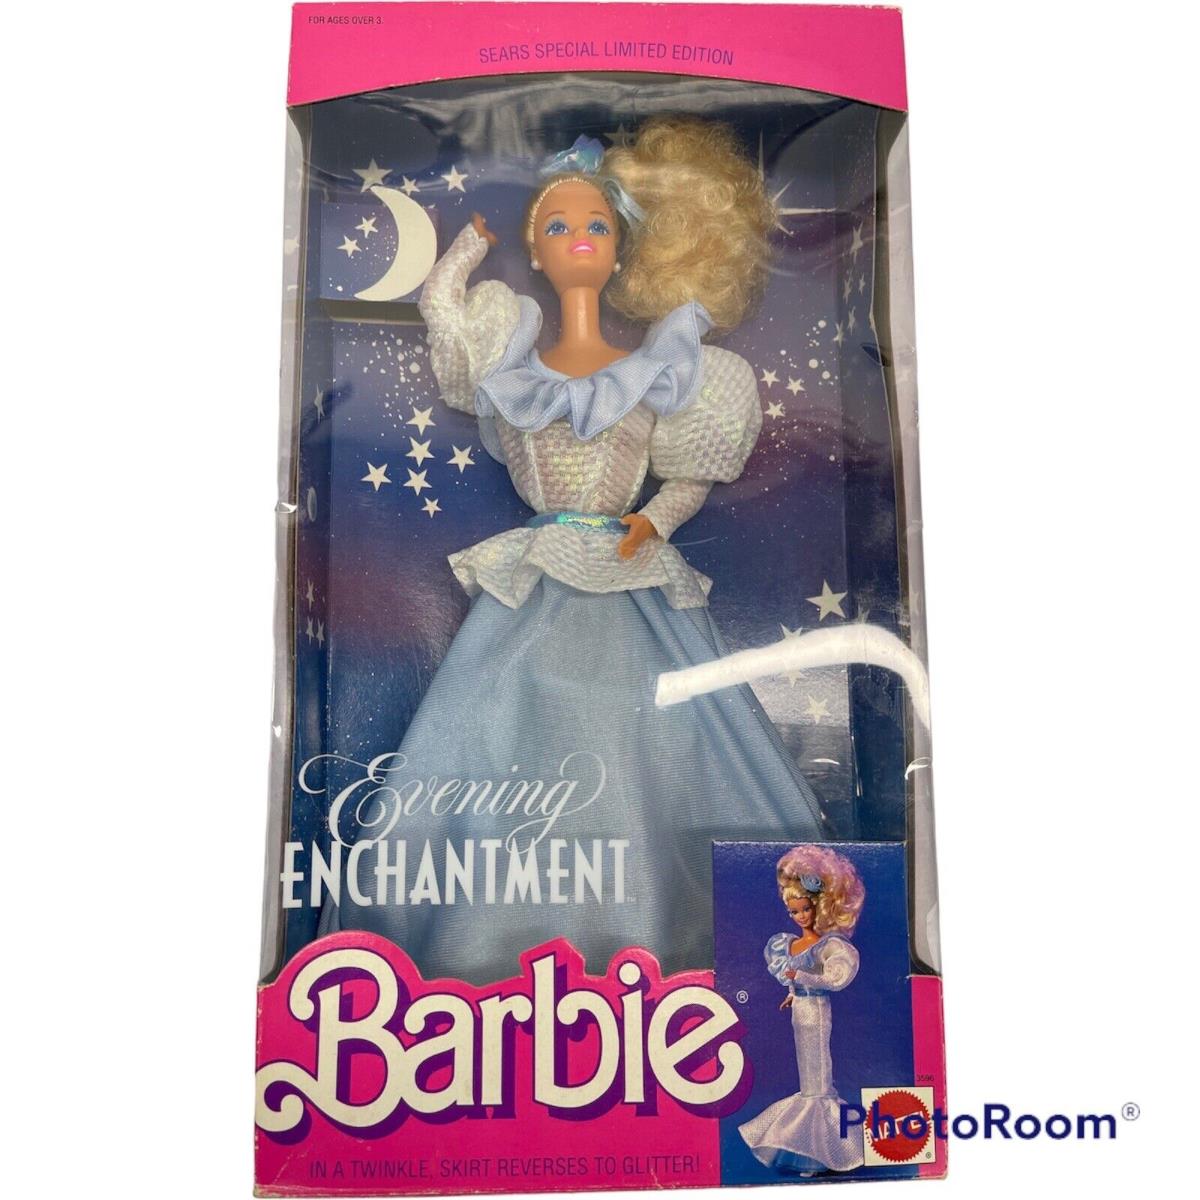 Barbie Evening Enchantment Sears Special Limited Edition 1995 3596